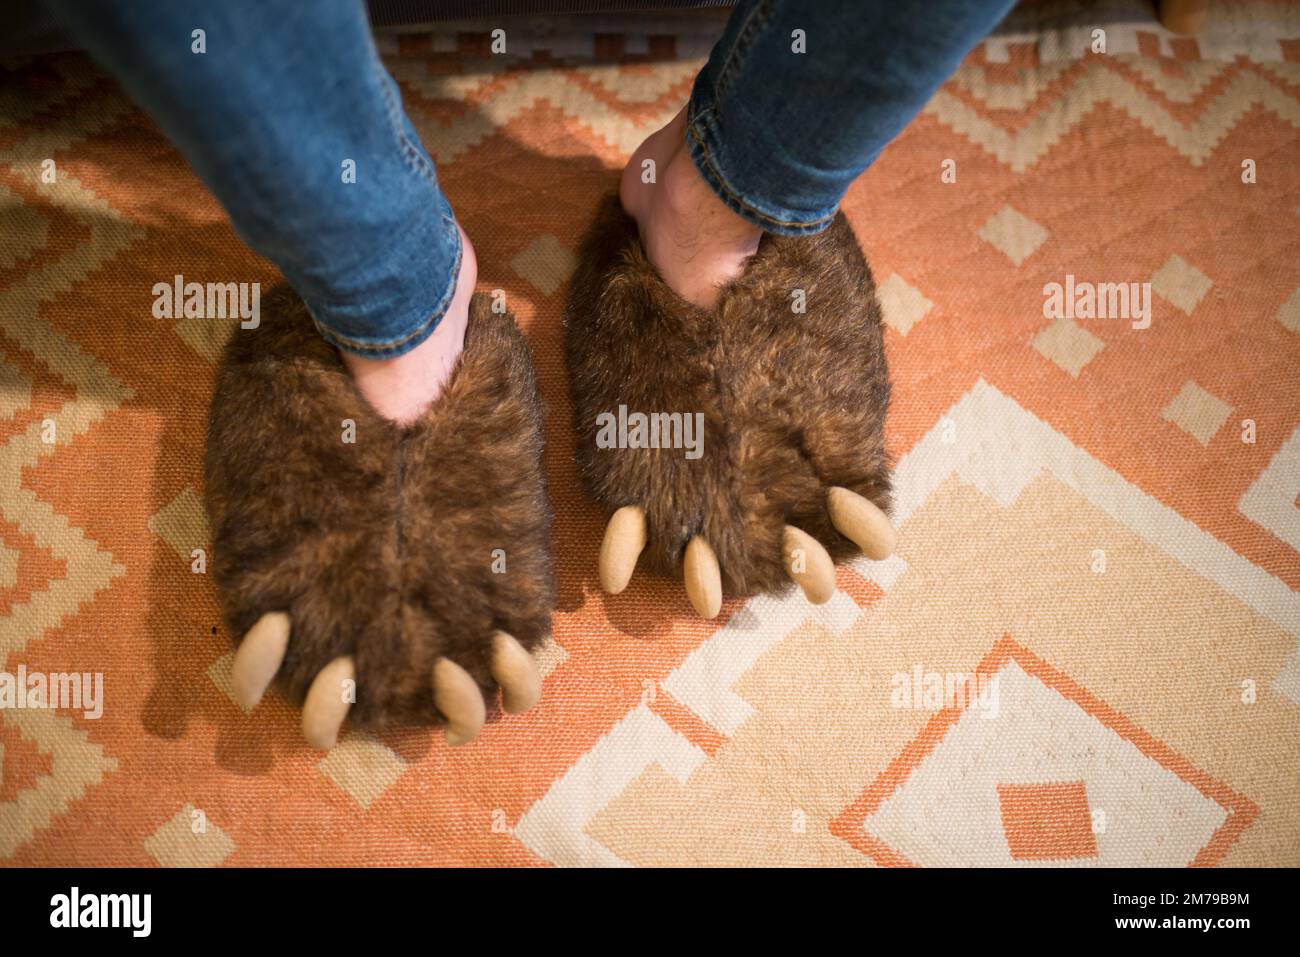 Feet with bear claws slippers. Seen from above. Interior Stock Photo